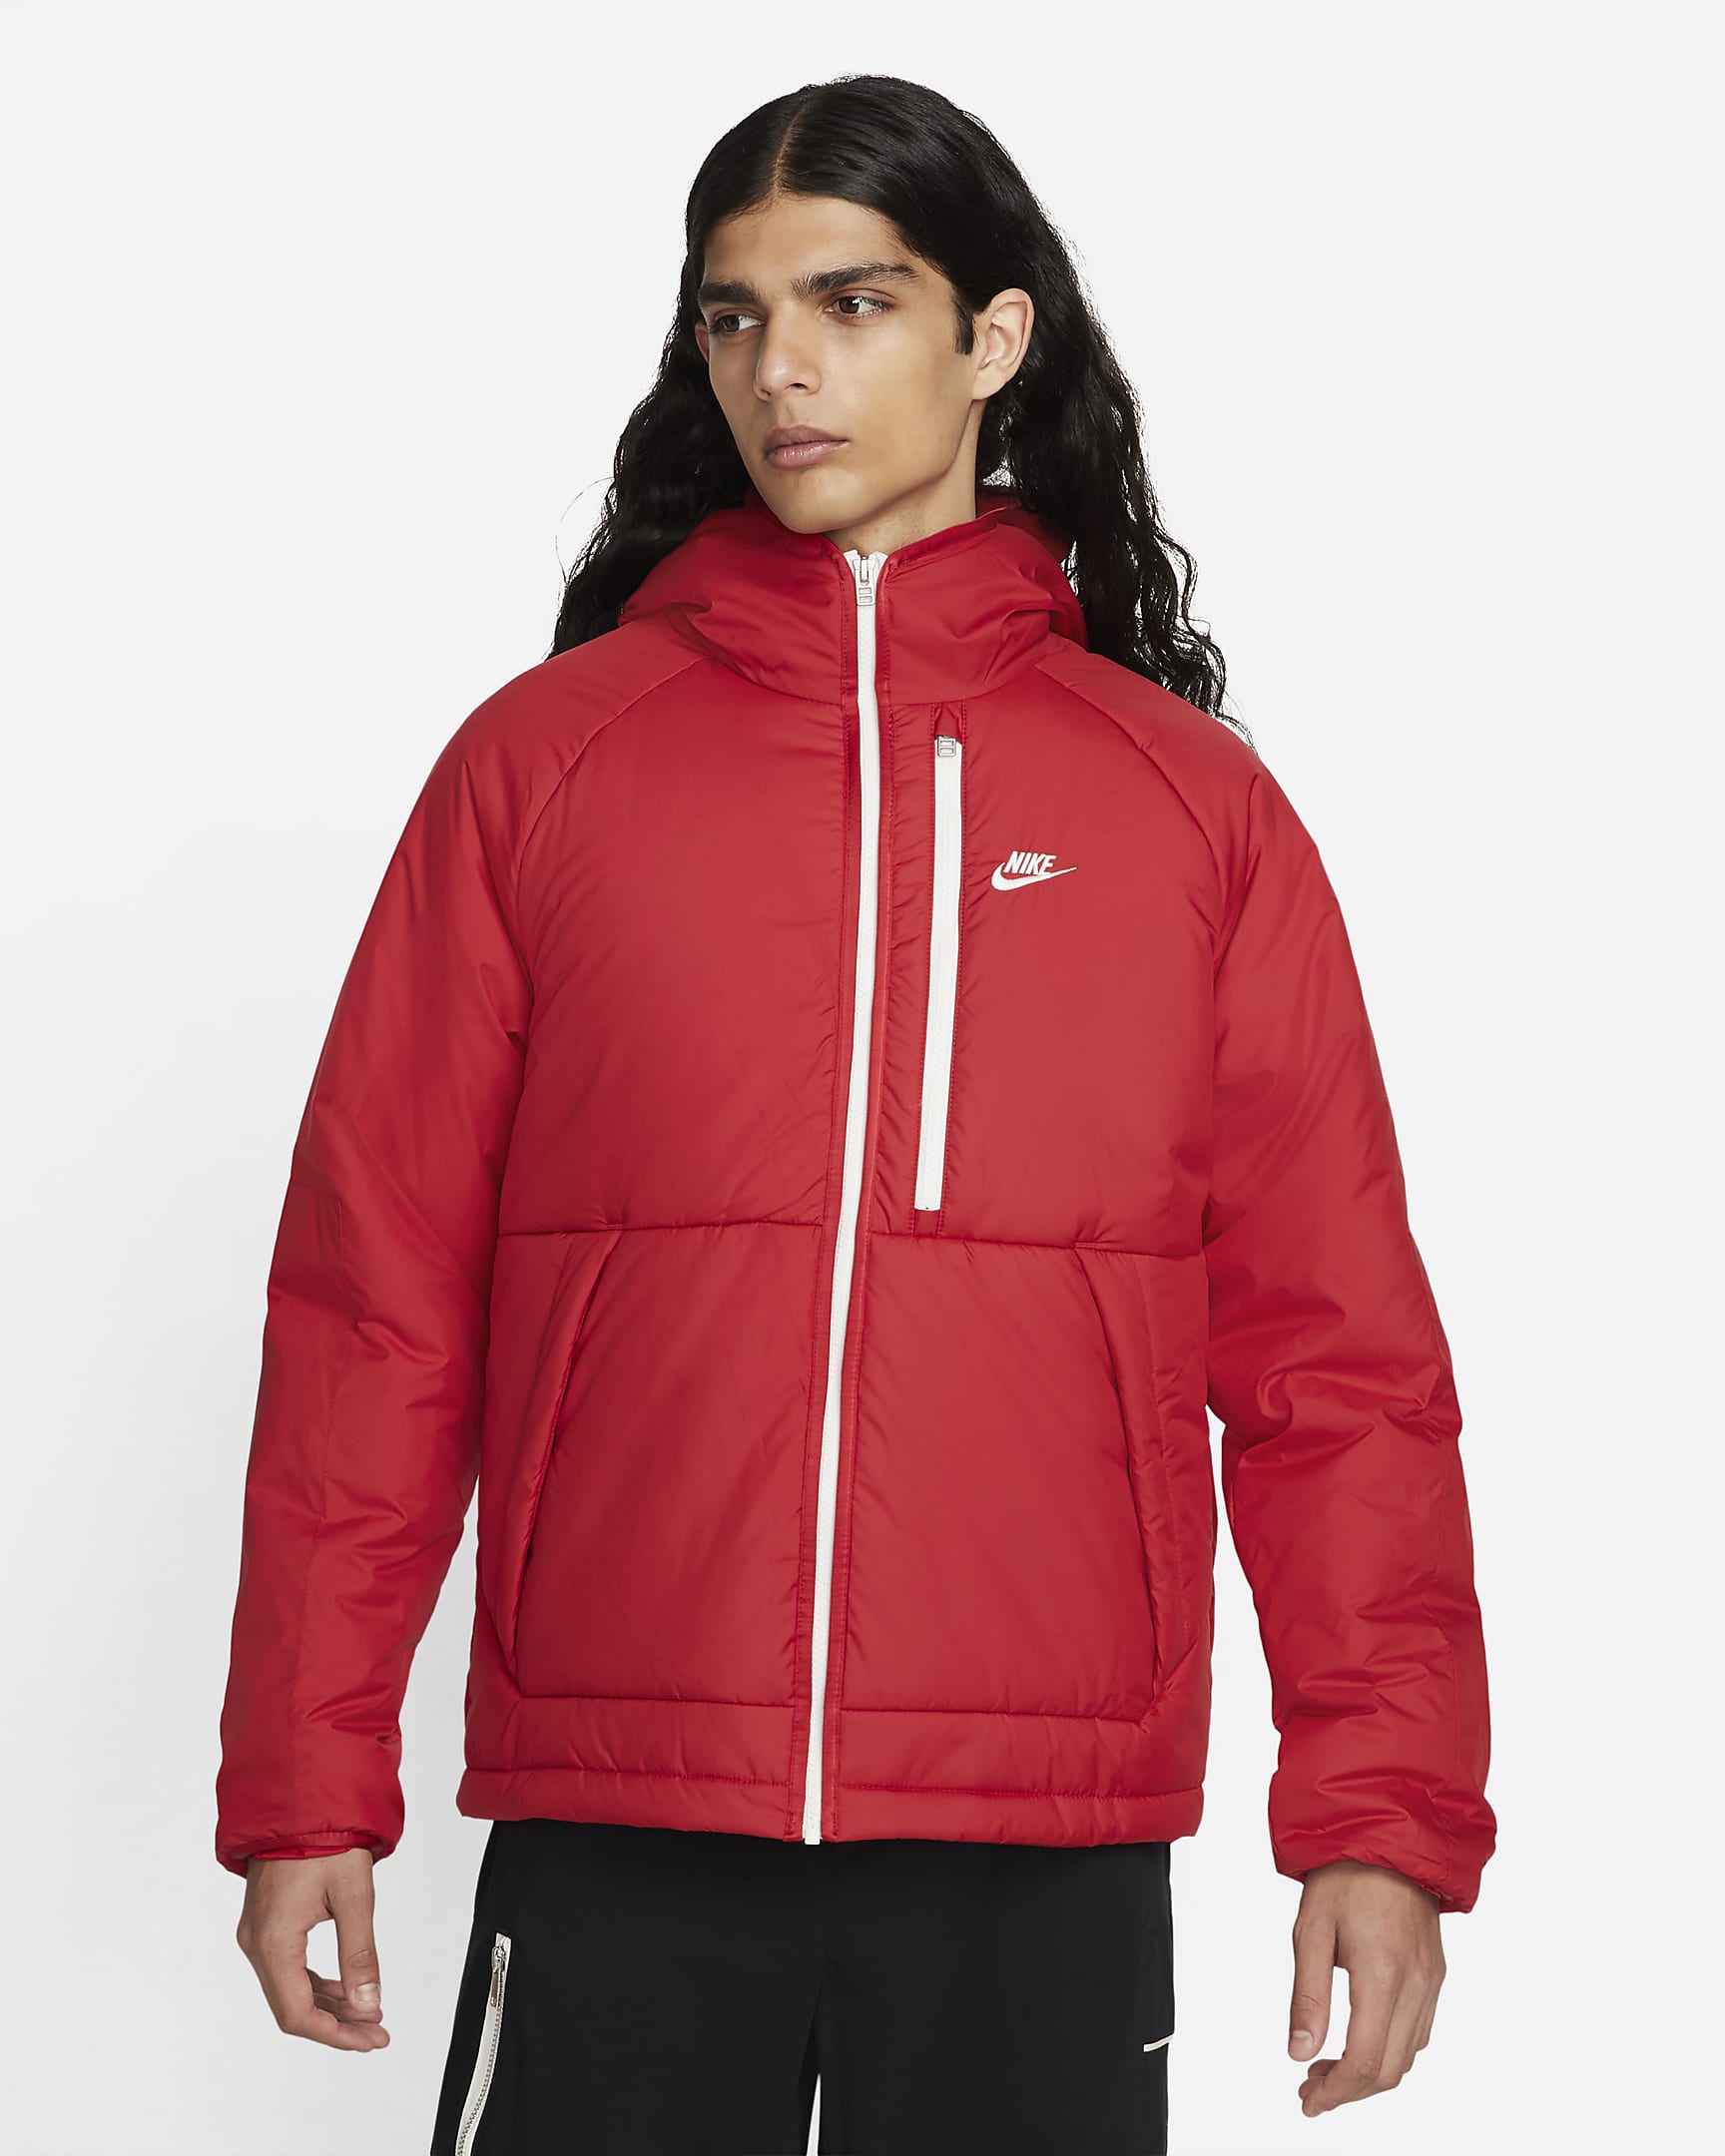 nike-sportswear-therma-fit-legacy-mens-hooded-jacket-dpRlXW.png